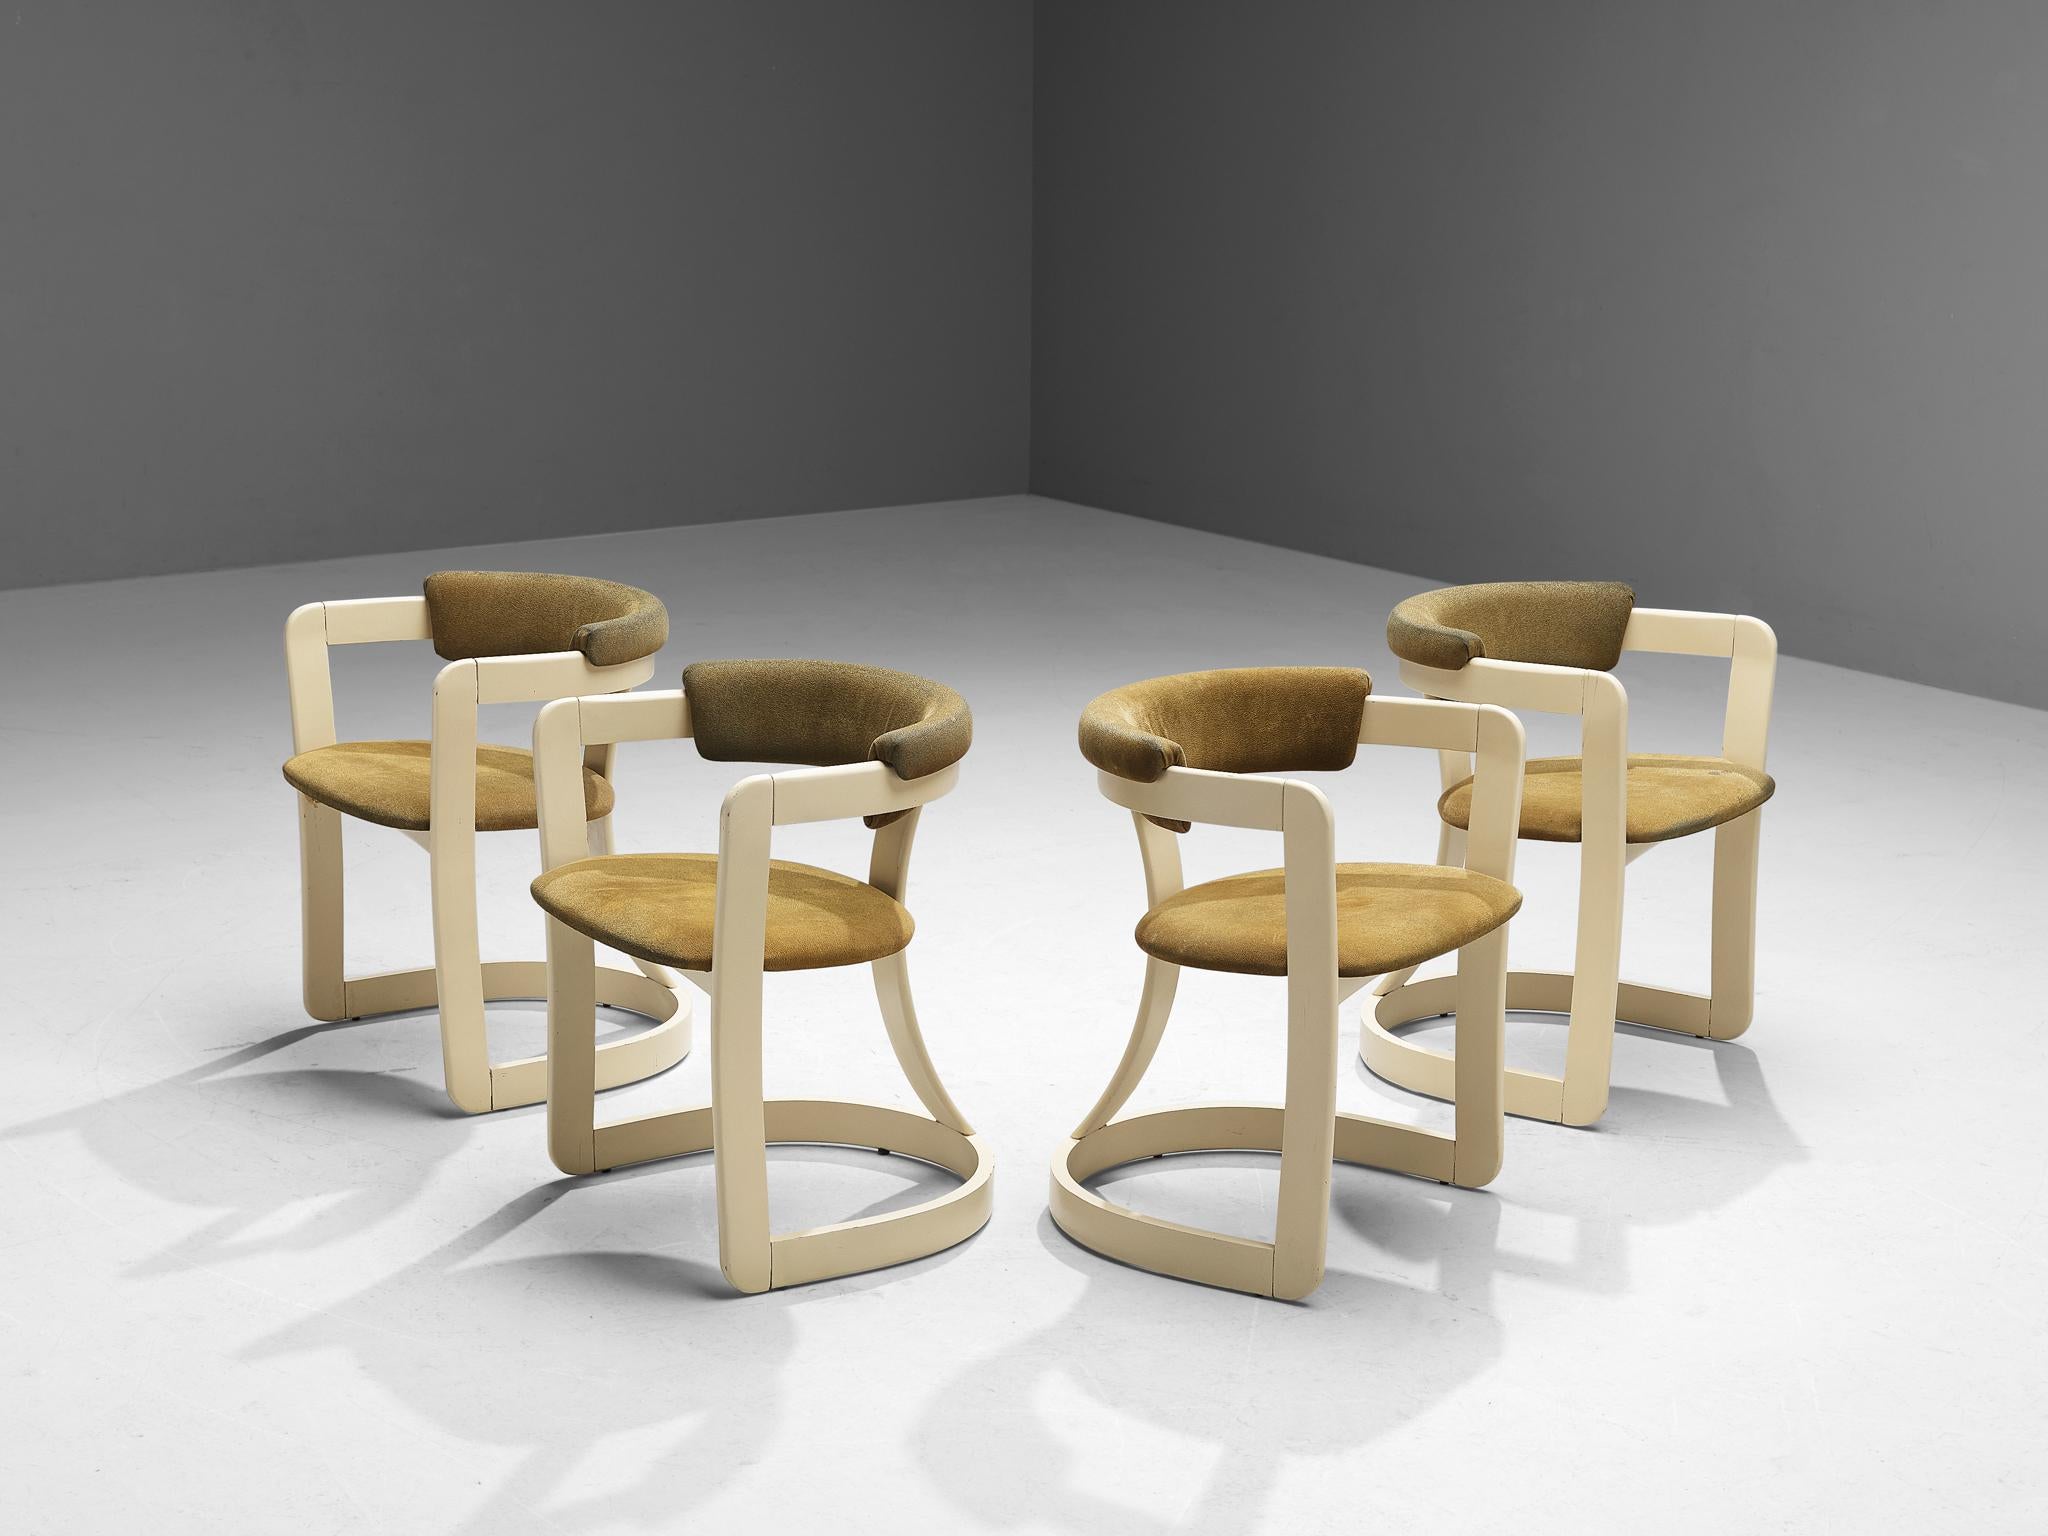 Set of four dining chairs, alcantara, lacquered wood, Italy, 1970s

These armchairs embrace the aesthetic sense of the 'Pamplona' chairs designed by Augusto Savini for Pozzi. This design is based on solely round shapes. The curved shape of the back